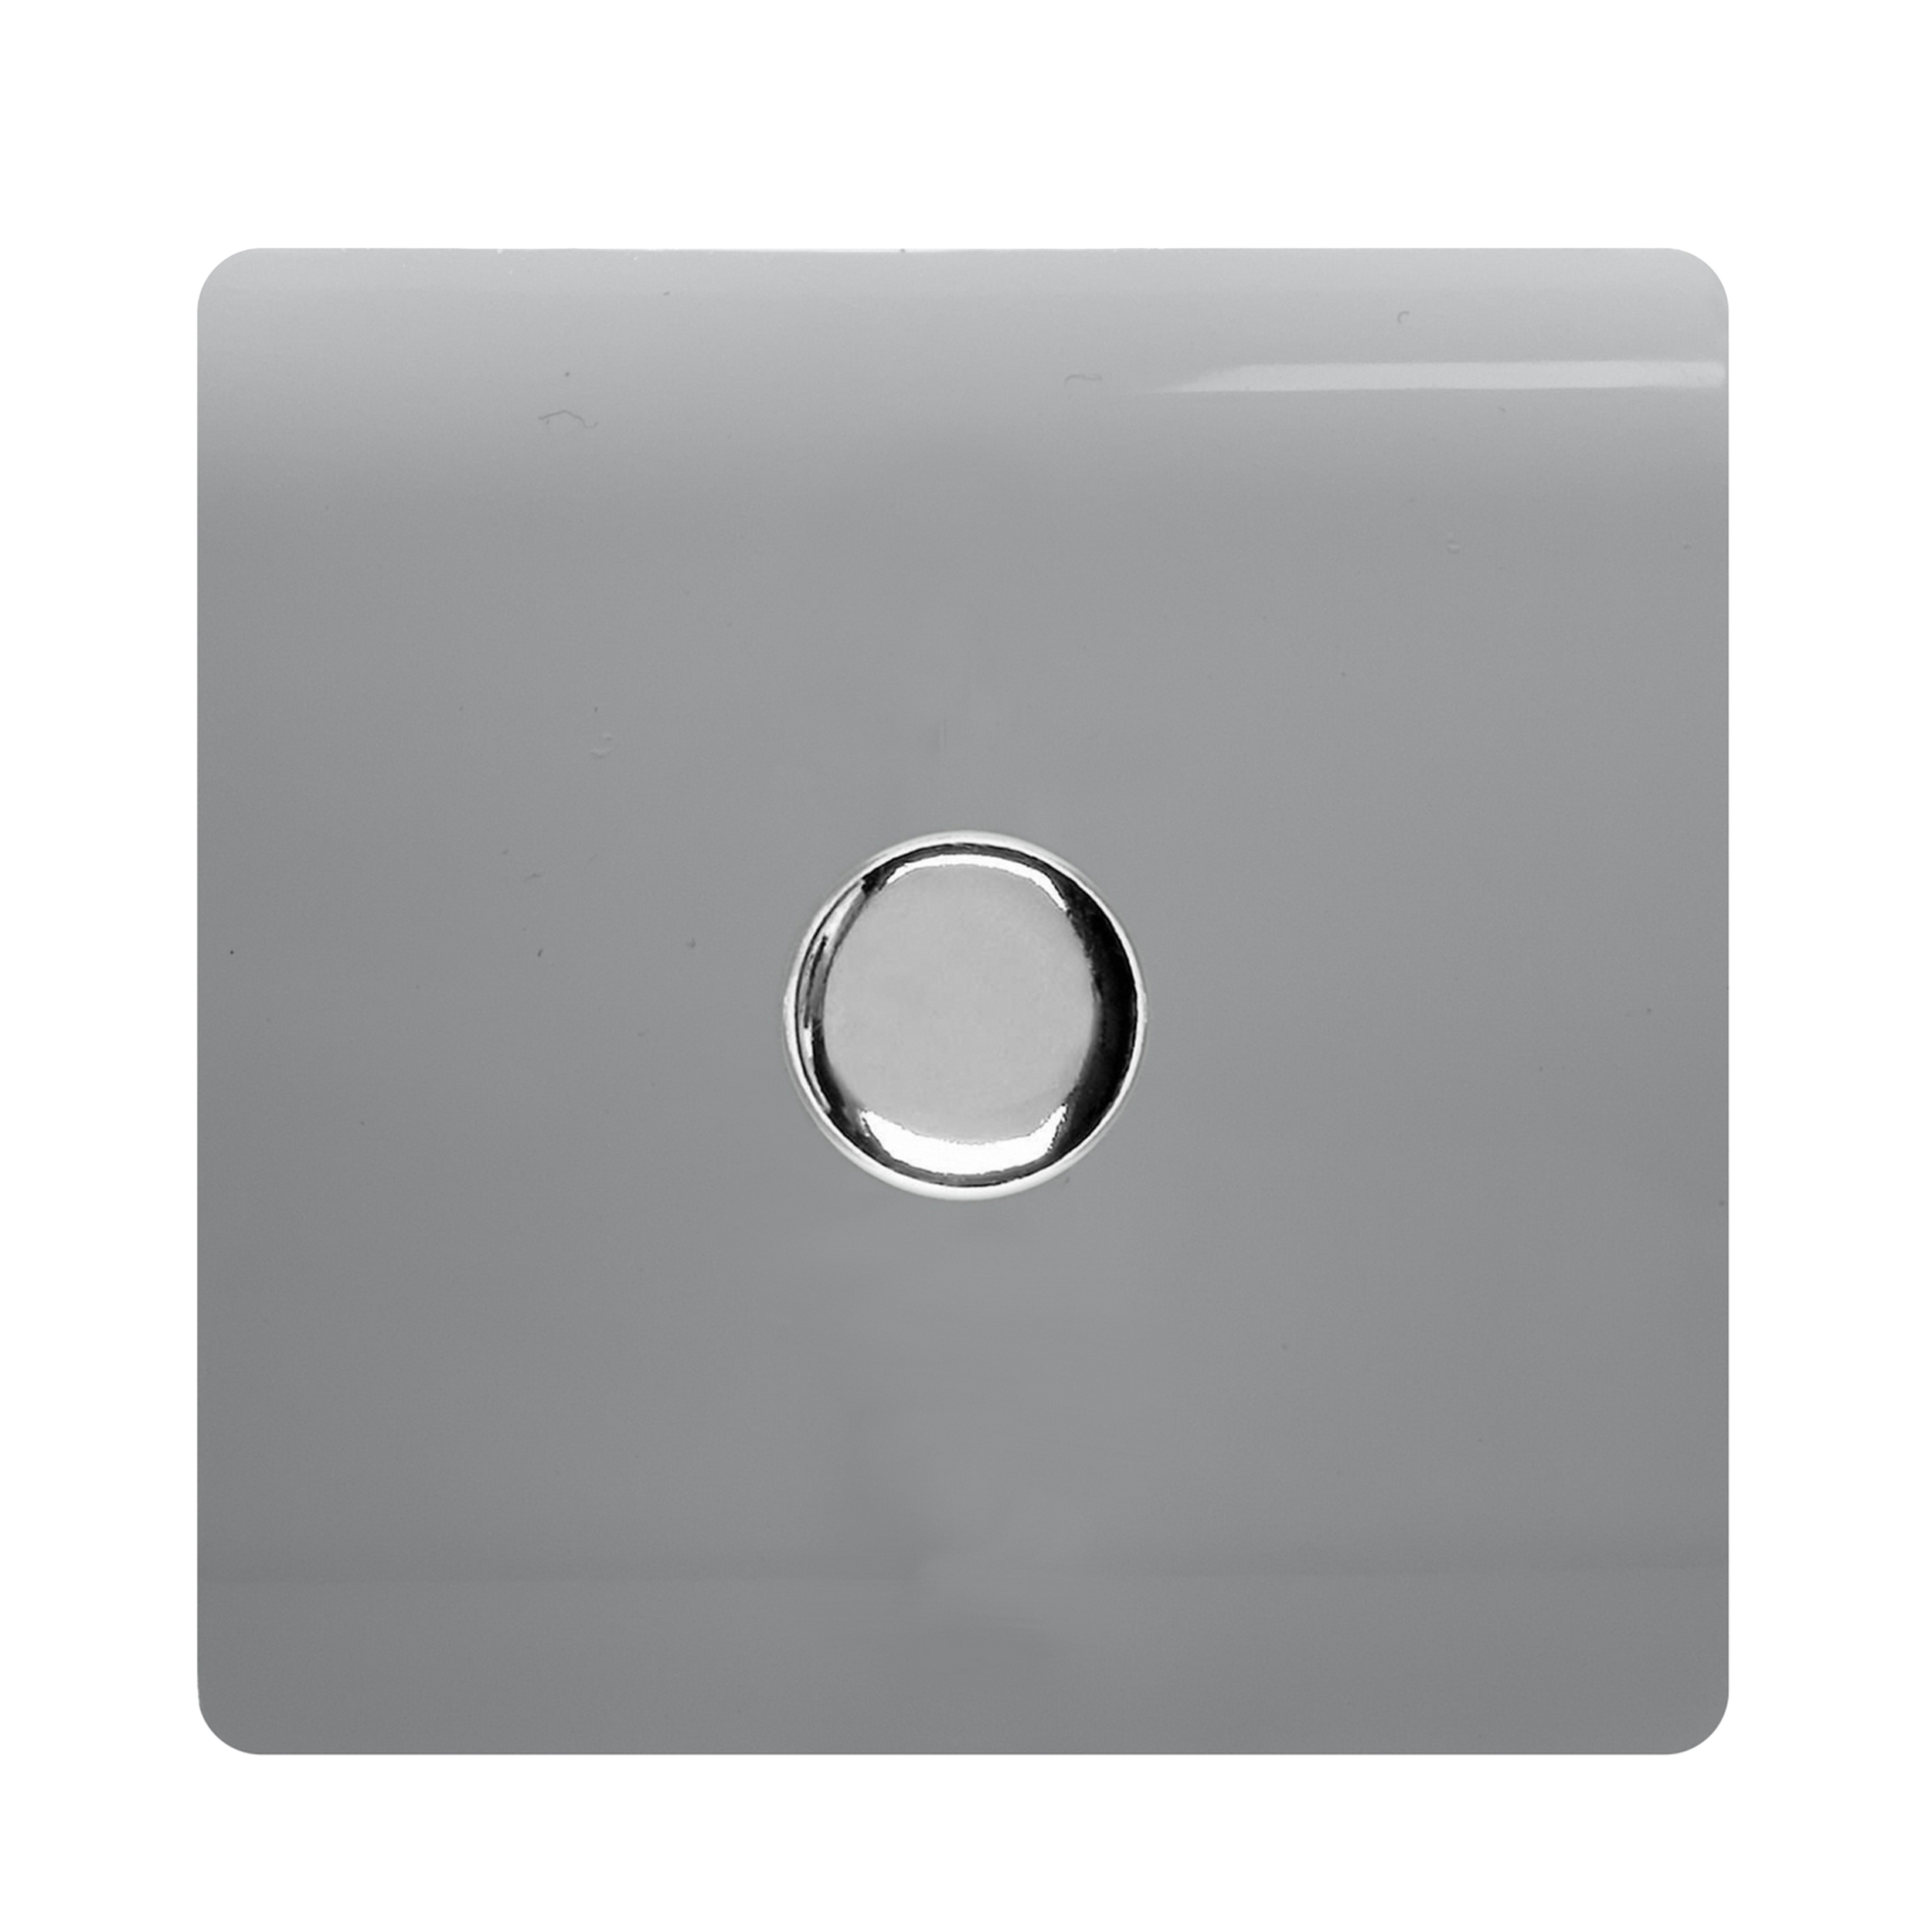 ART-LDMSI  1 Gang 1 Way LED Dimmer Switch Silver